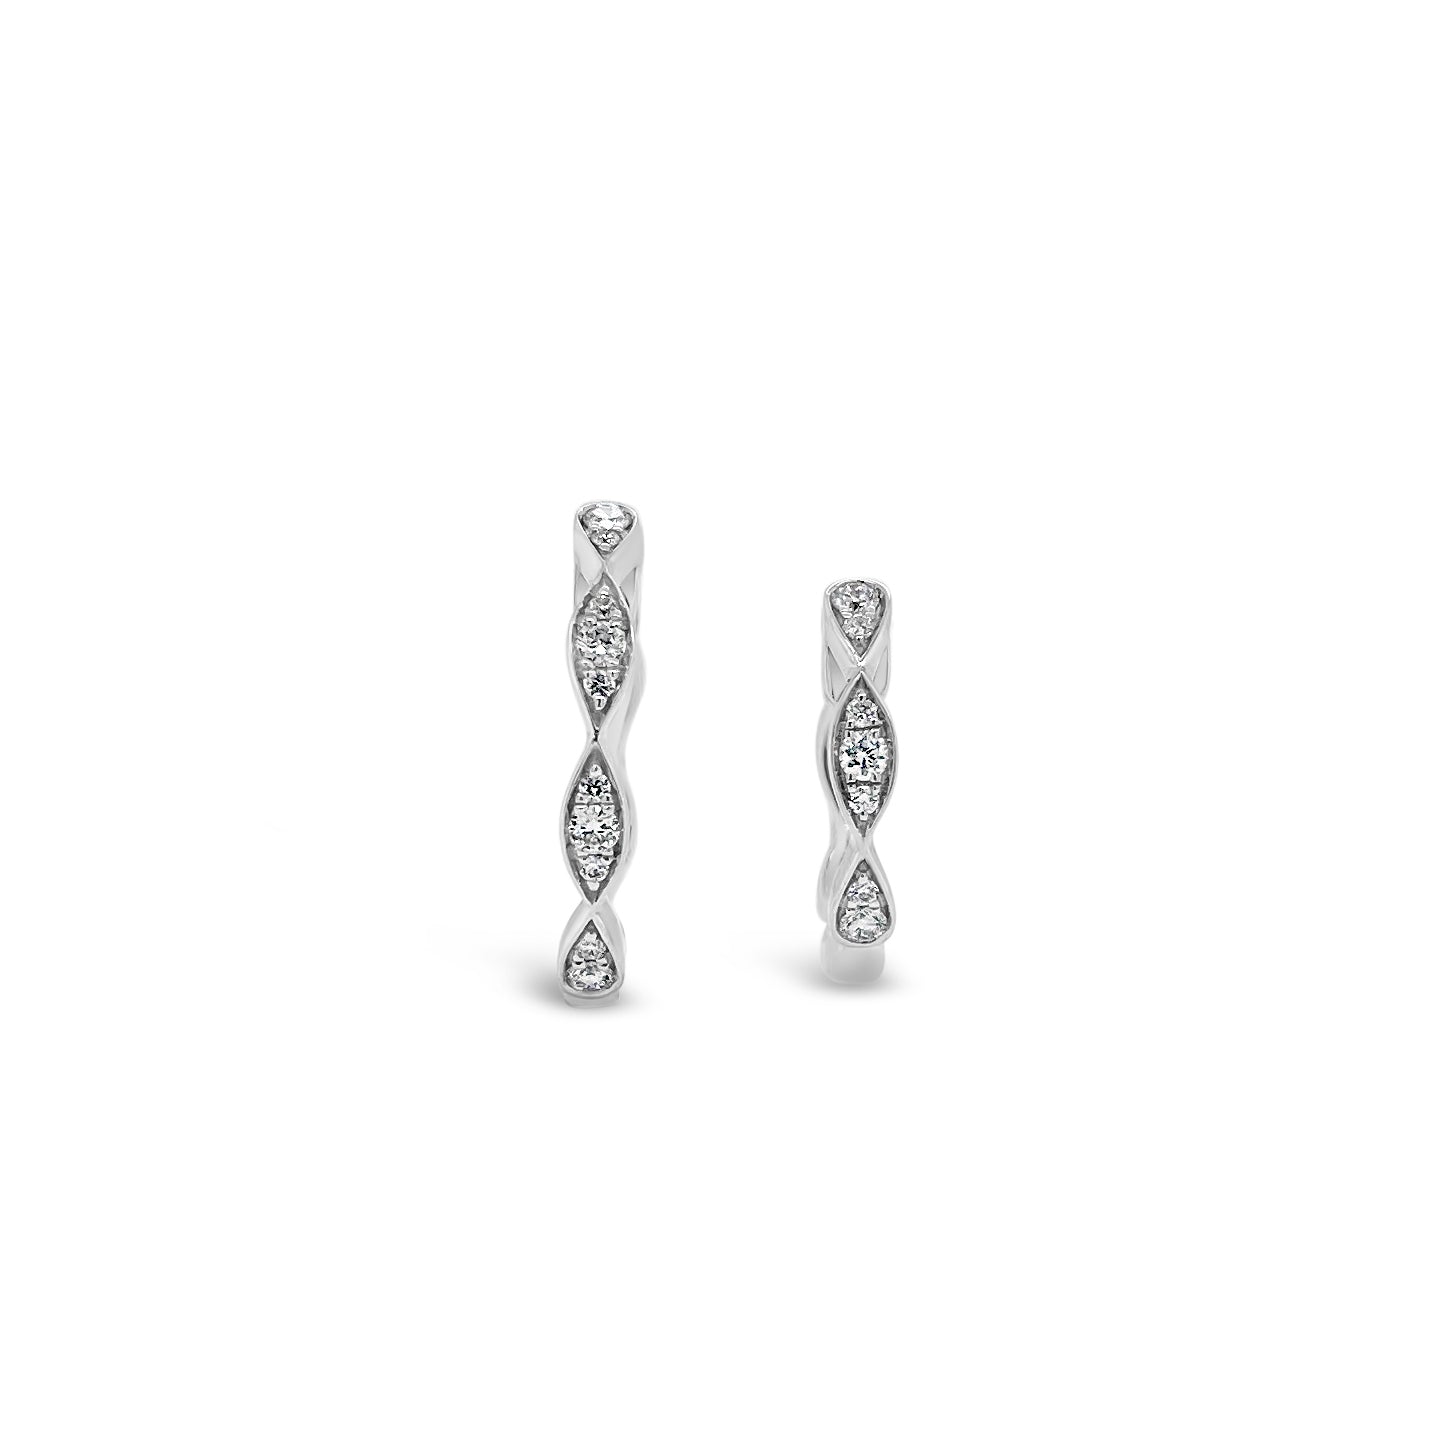 Small Diamond Wavy Huggie Earrings  -18K gold weighing 2.26 grams  -14 round diamonds totaling 0.15 carats